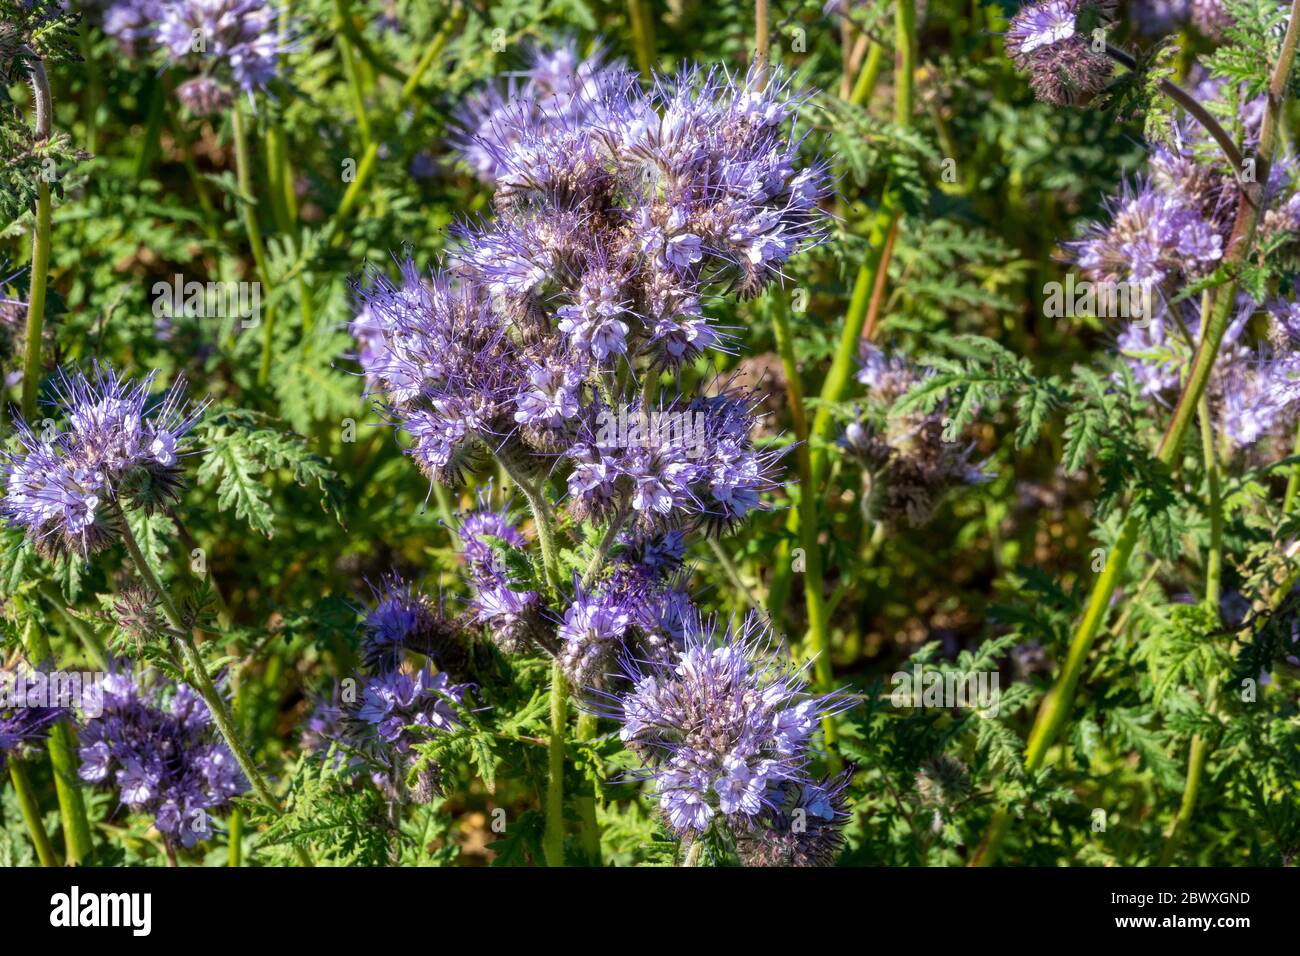 A small area of of Phacelia showing plant heads and leaves Stock Photo